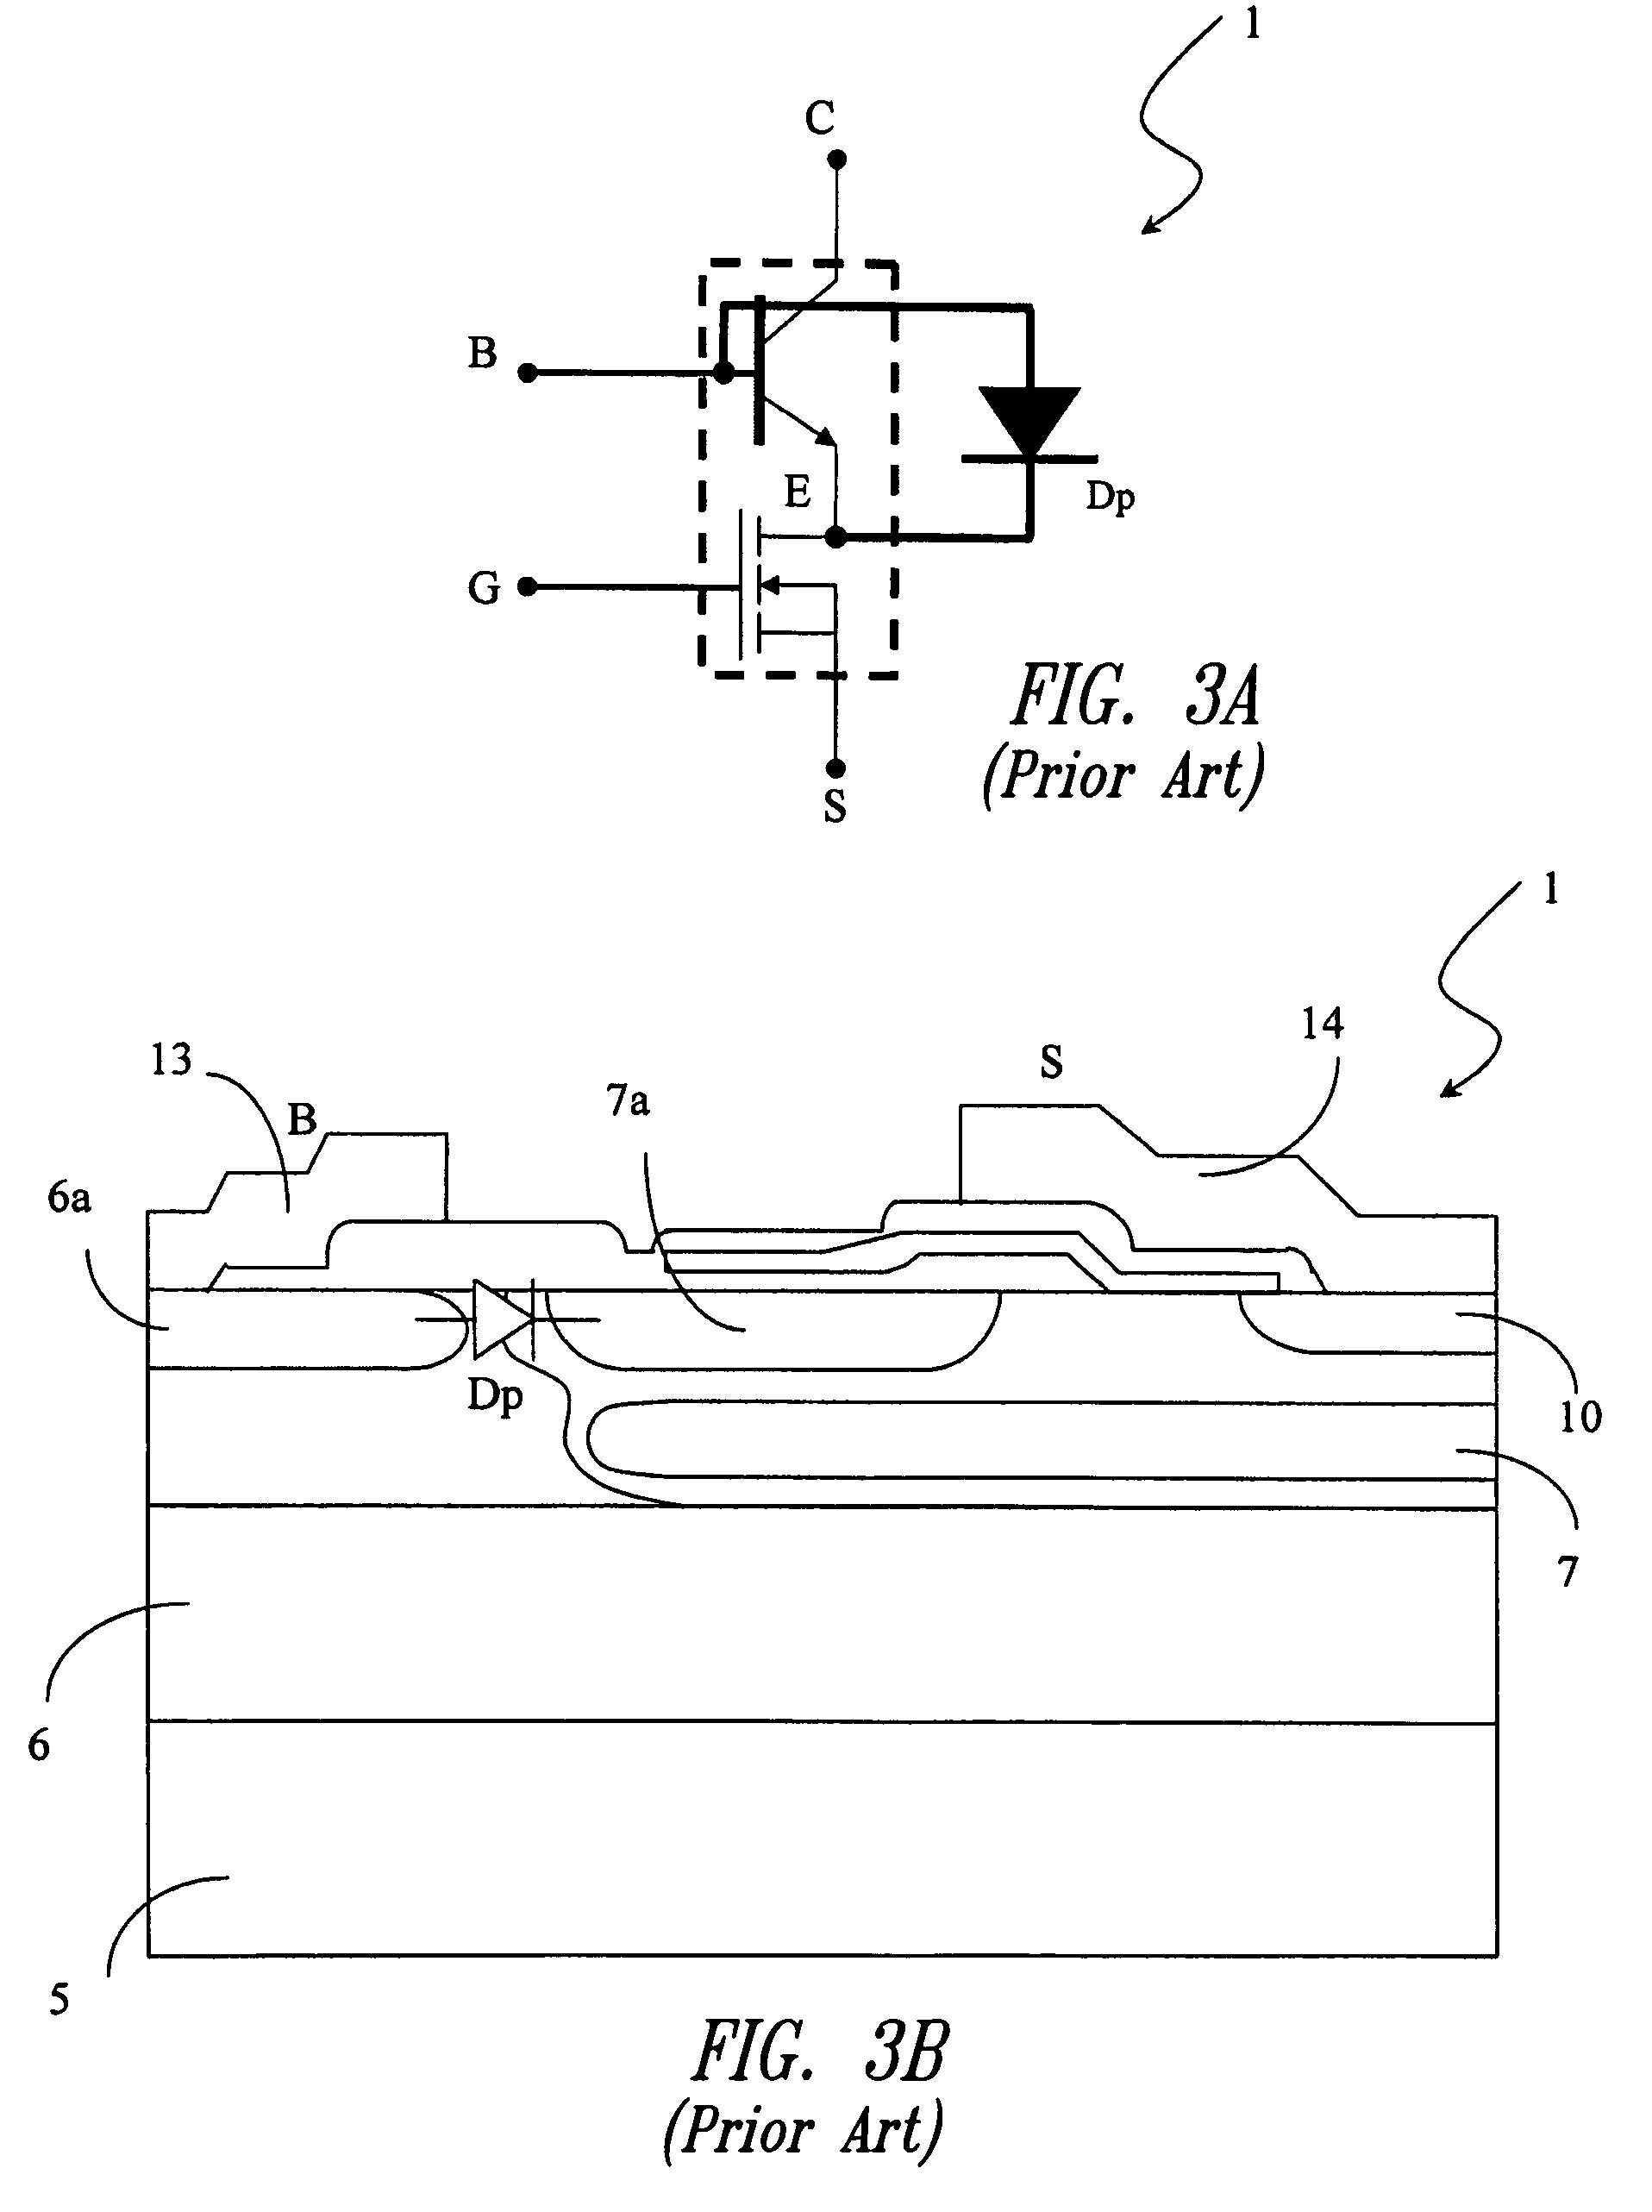 Method for realizing a contact of an integrated well in a semiconductor substrate, in particular for a base terminal of a bipolar transistor, with enhancement of the transistor performances